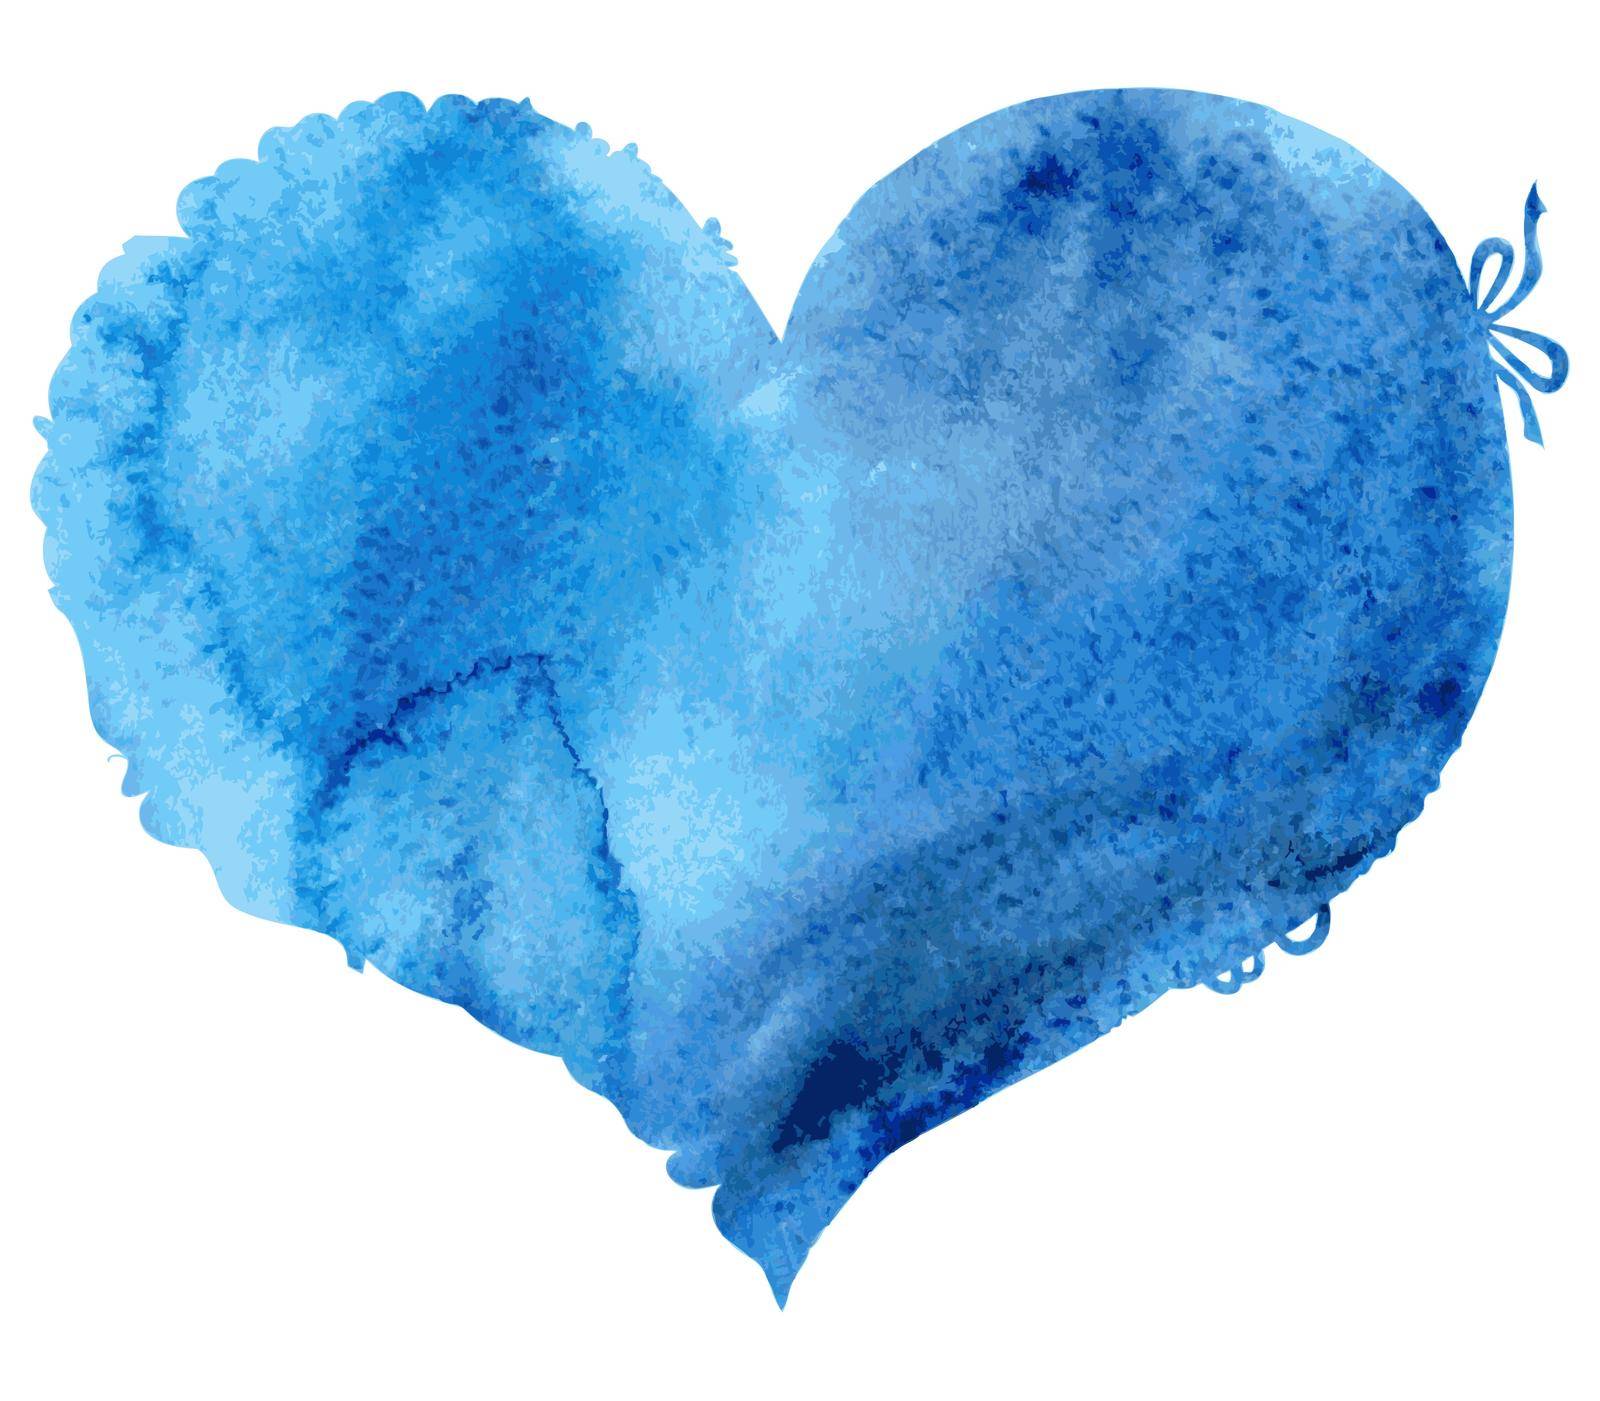 watercolor blue heart with a lace edge by NataOmsk